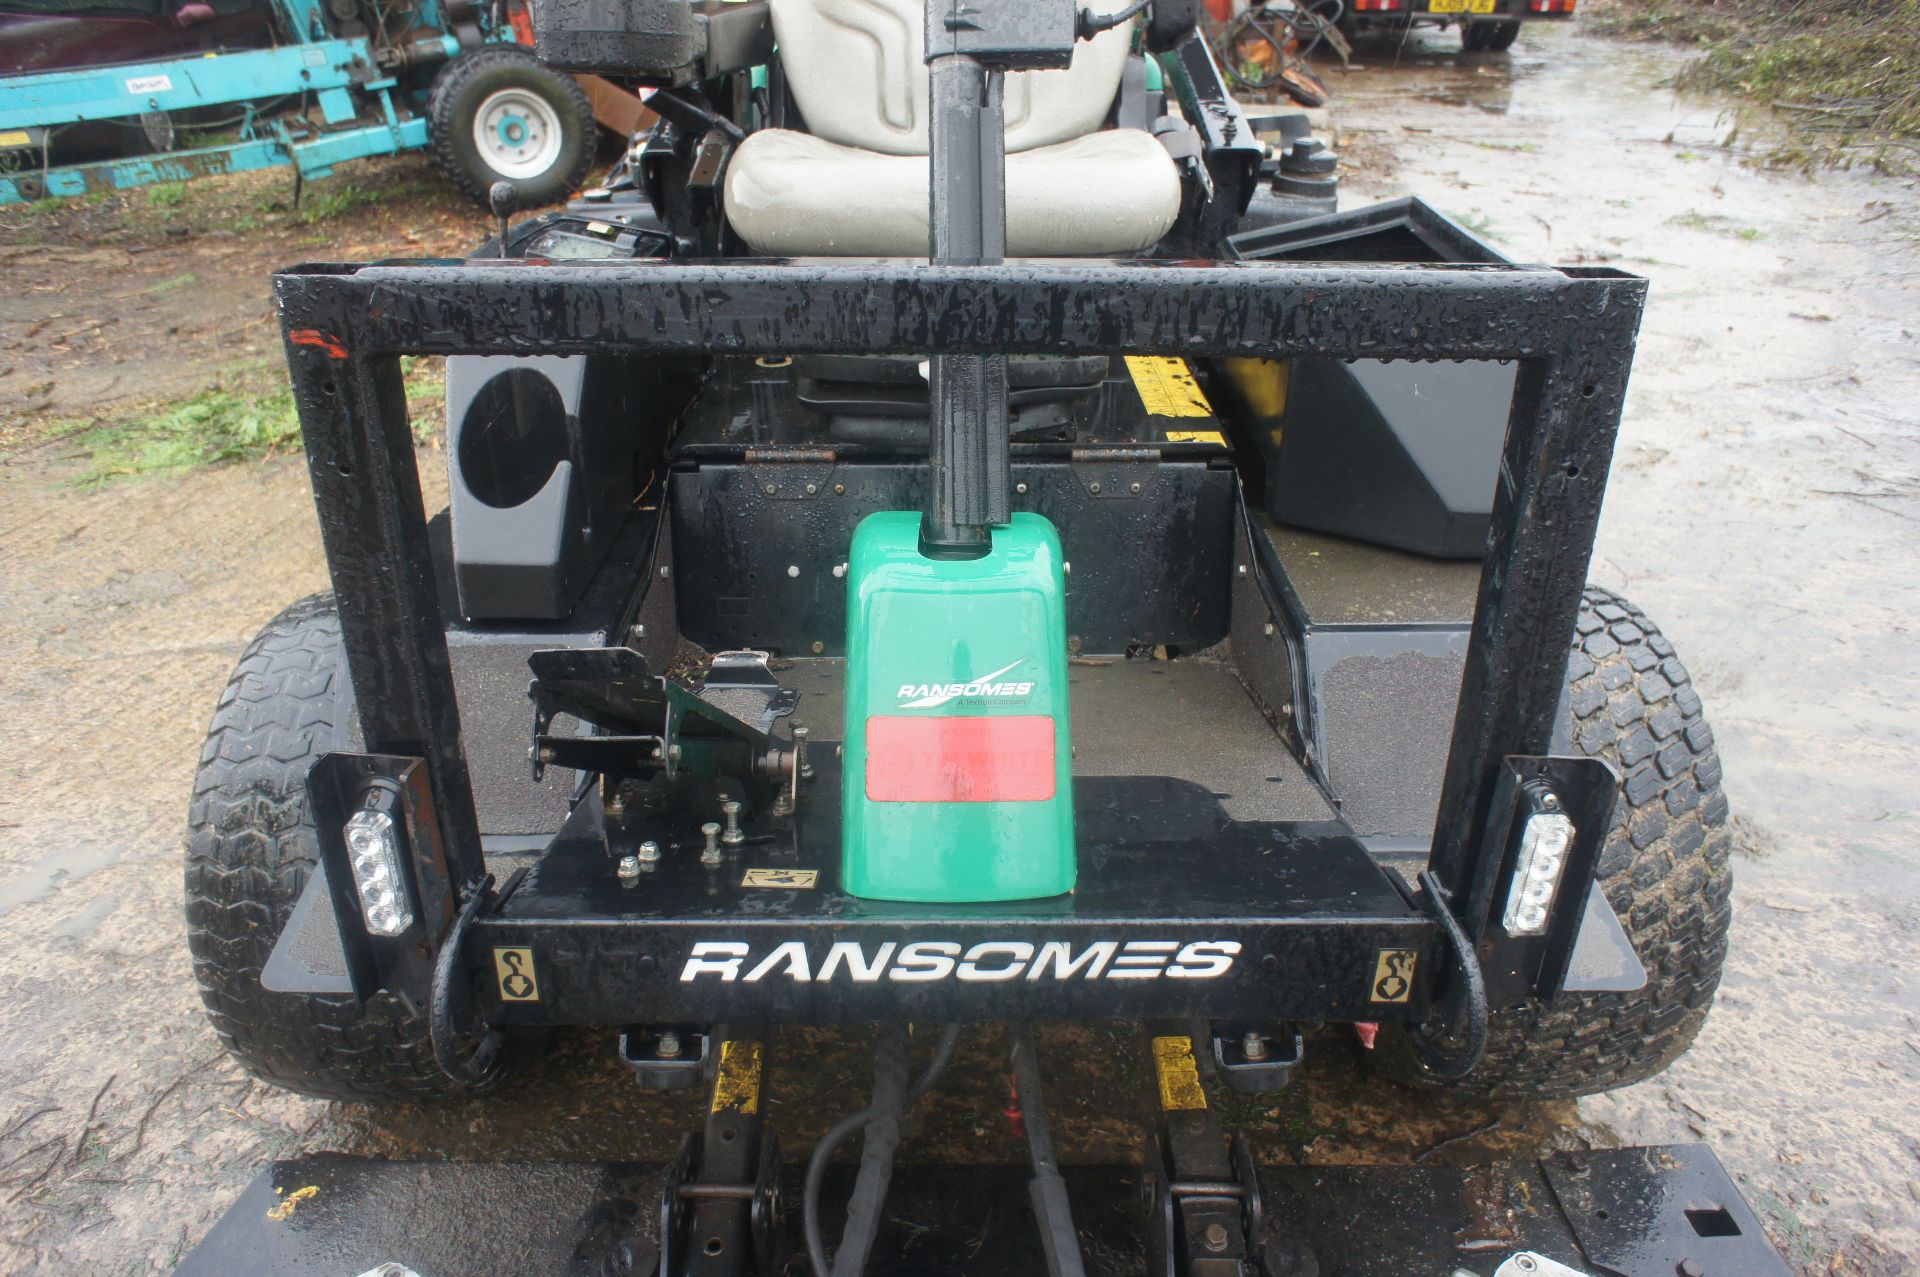 Ransomes HR300 Rotary Ride-On Mower, diesel engine, 60 in. cutting deck, ROPS bar, hazard led kit, - Image 10 of 20